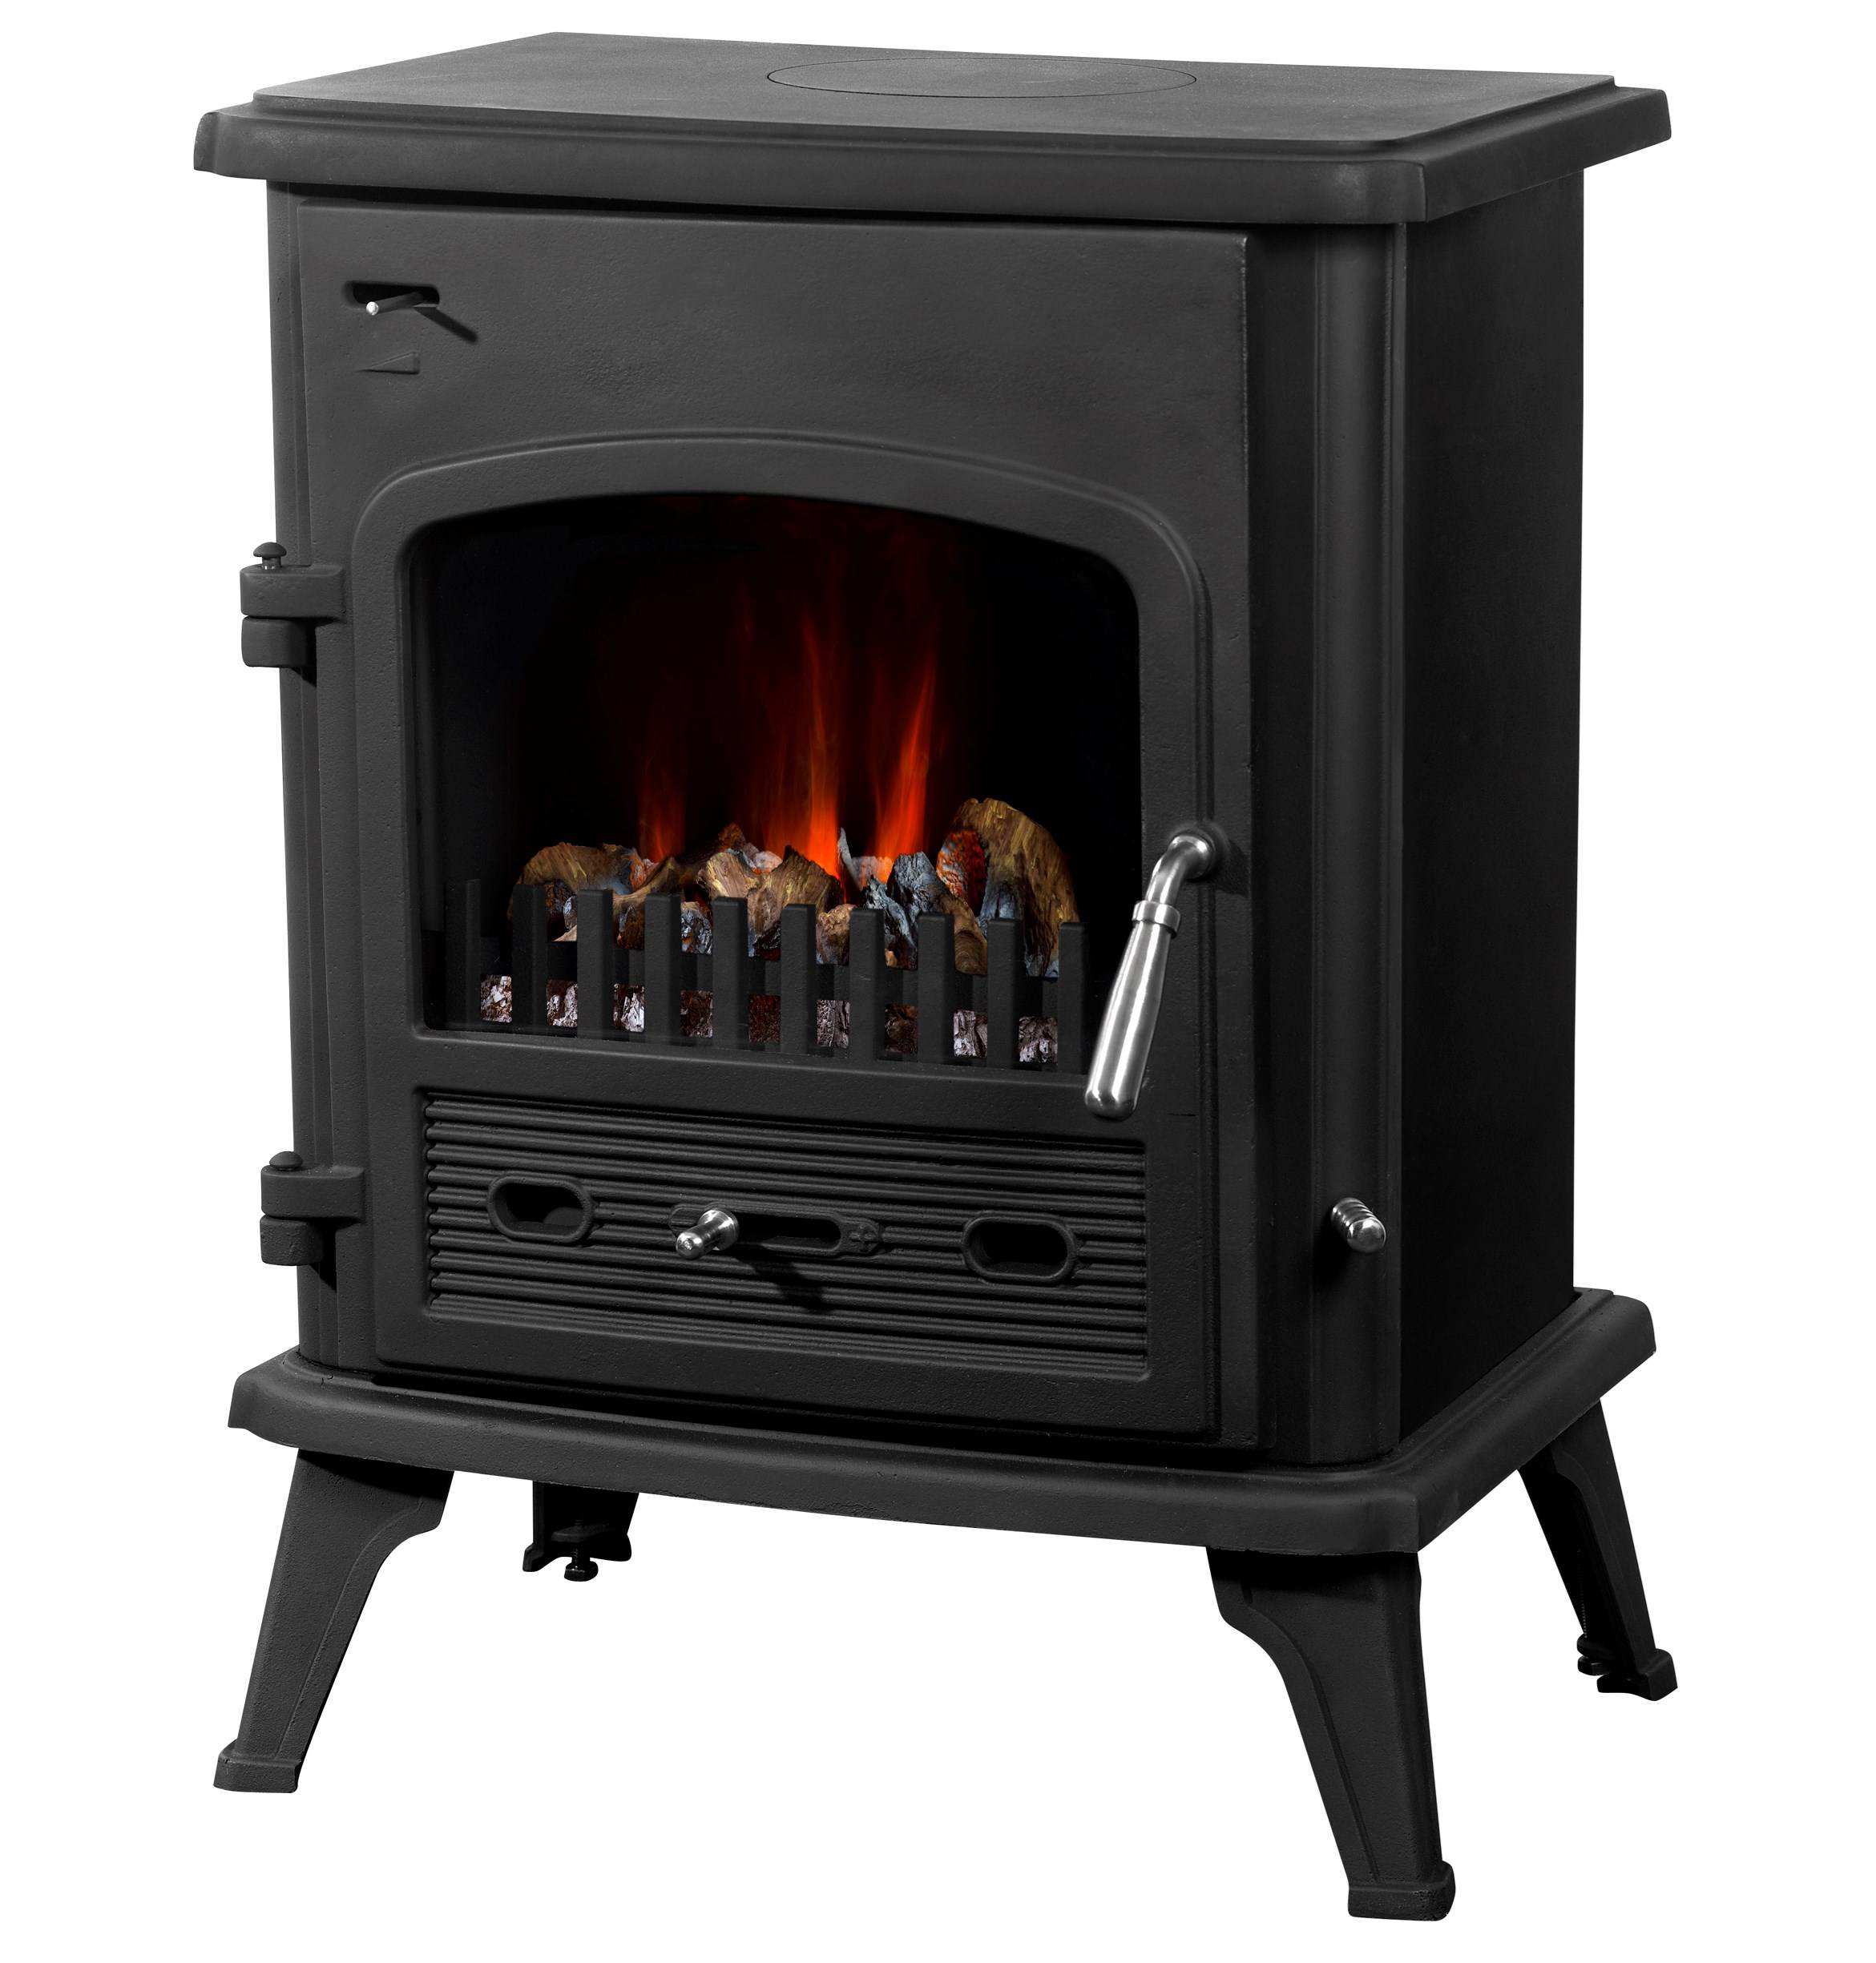 dimplex stoves best of dimplex boiler stove 13kw of dimplex stoves